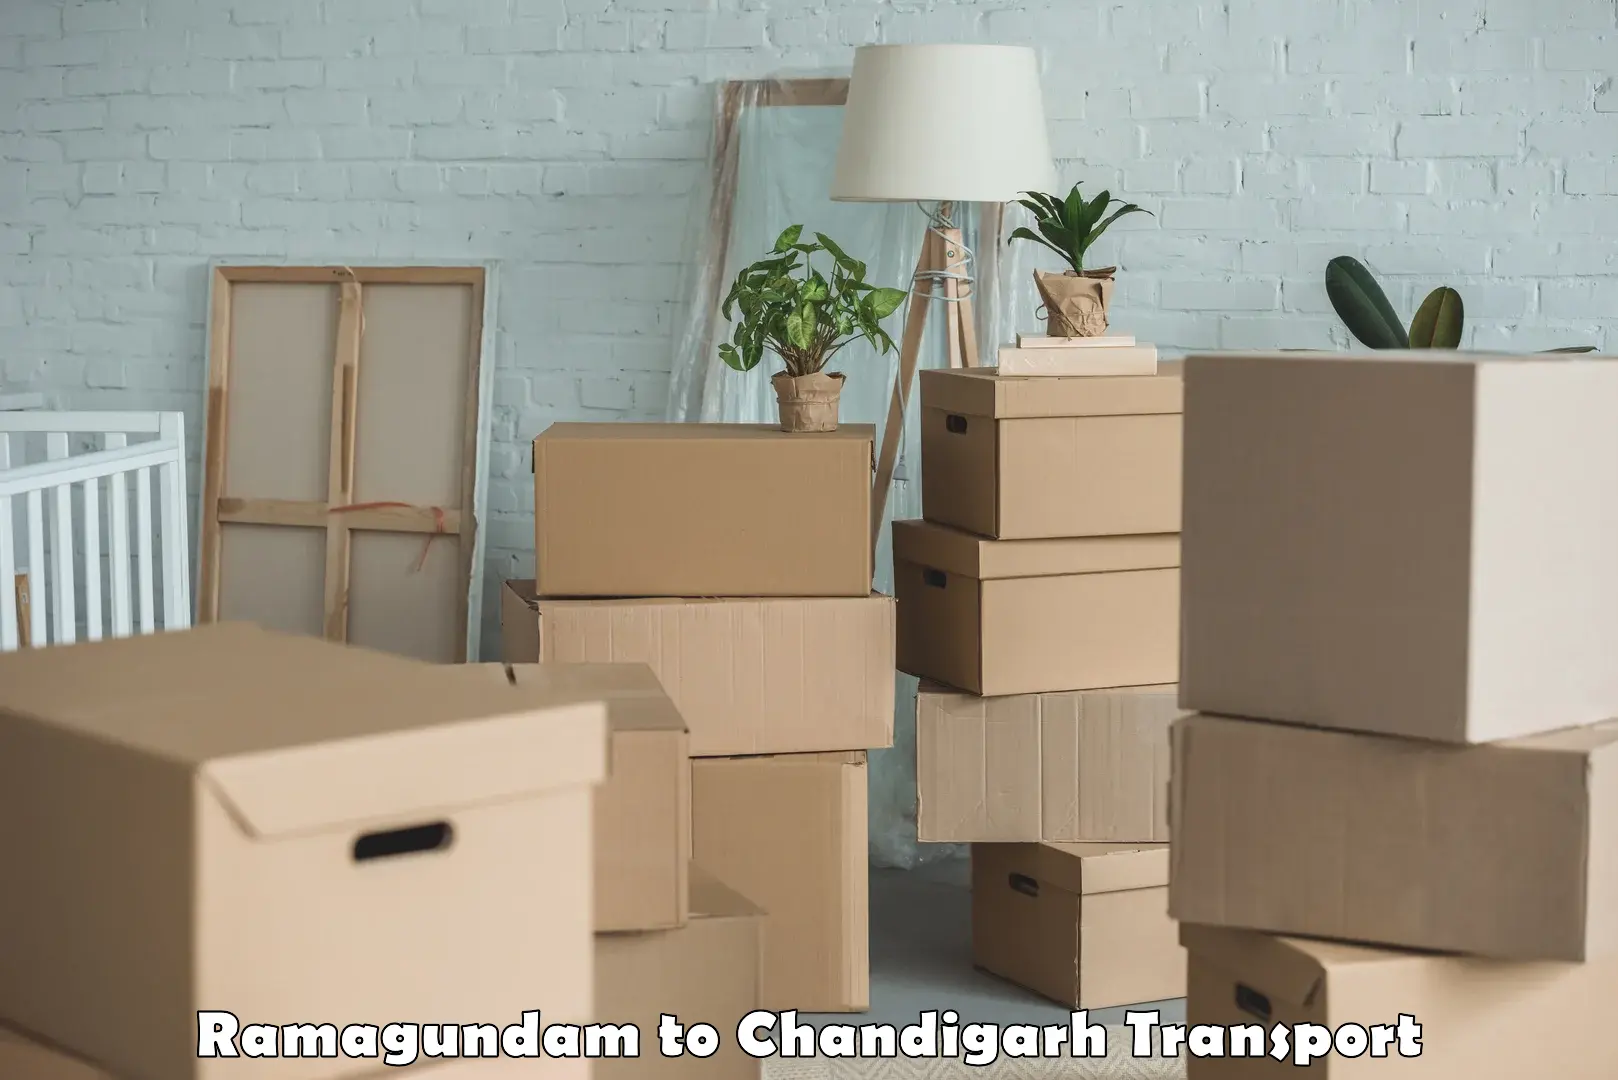 Part load transport service in India in Ramagundam to Chandigarh